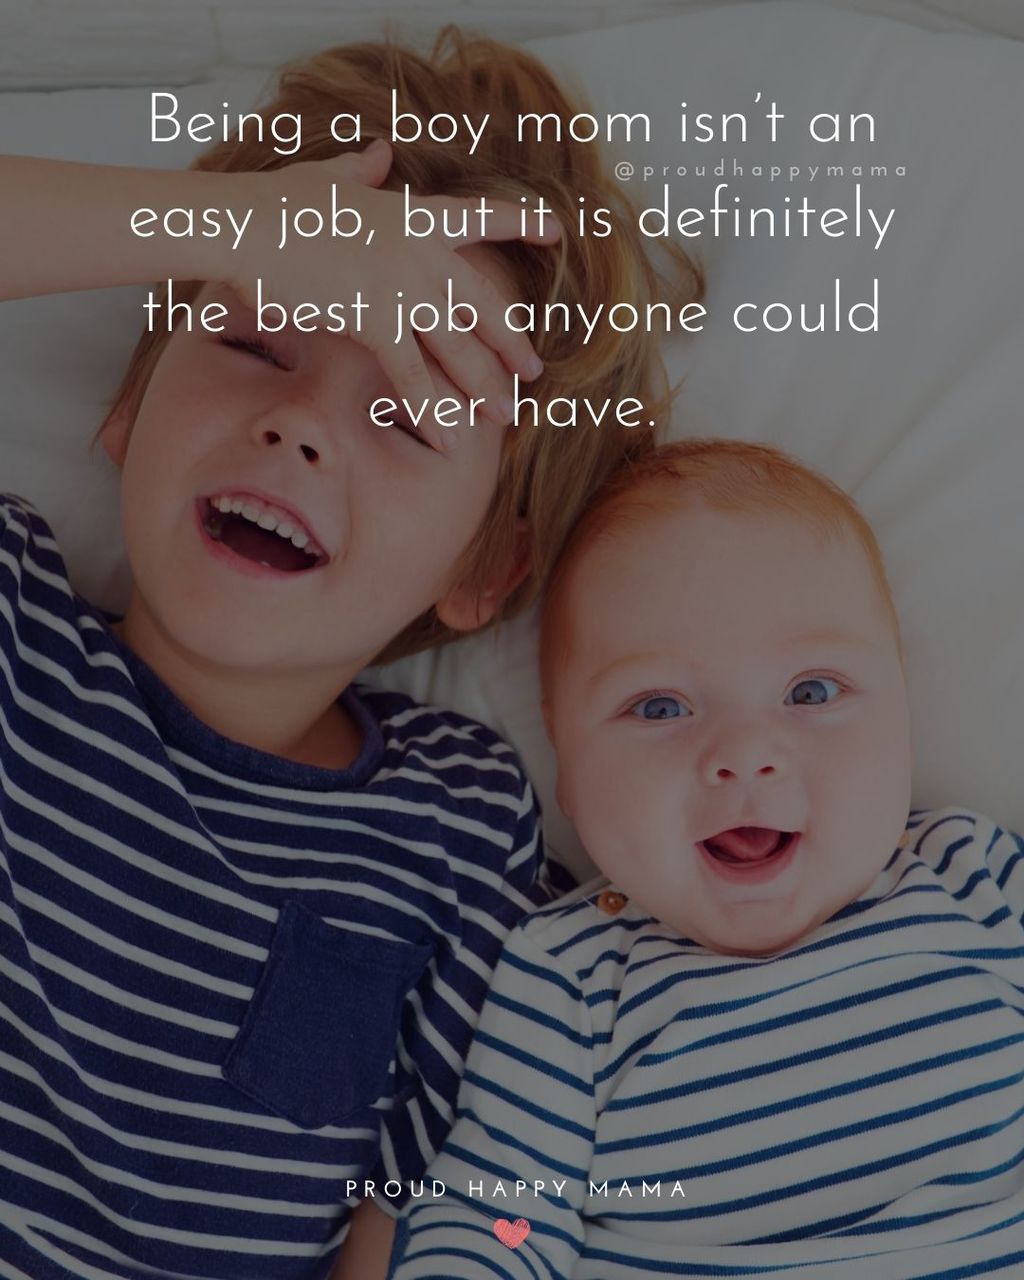 Boy Mom Quotes - Being a boy mom isn’t an easy job, but it is definitely the best job anyone could ever have.